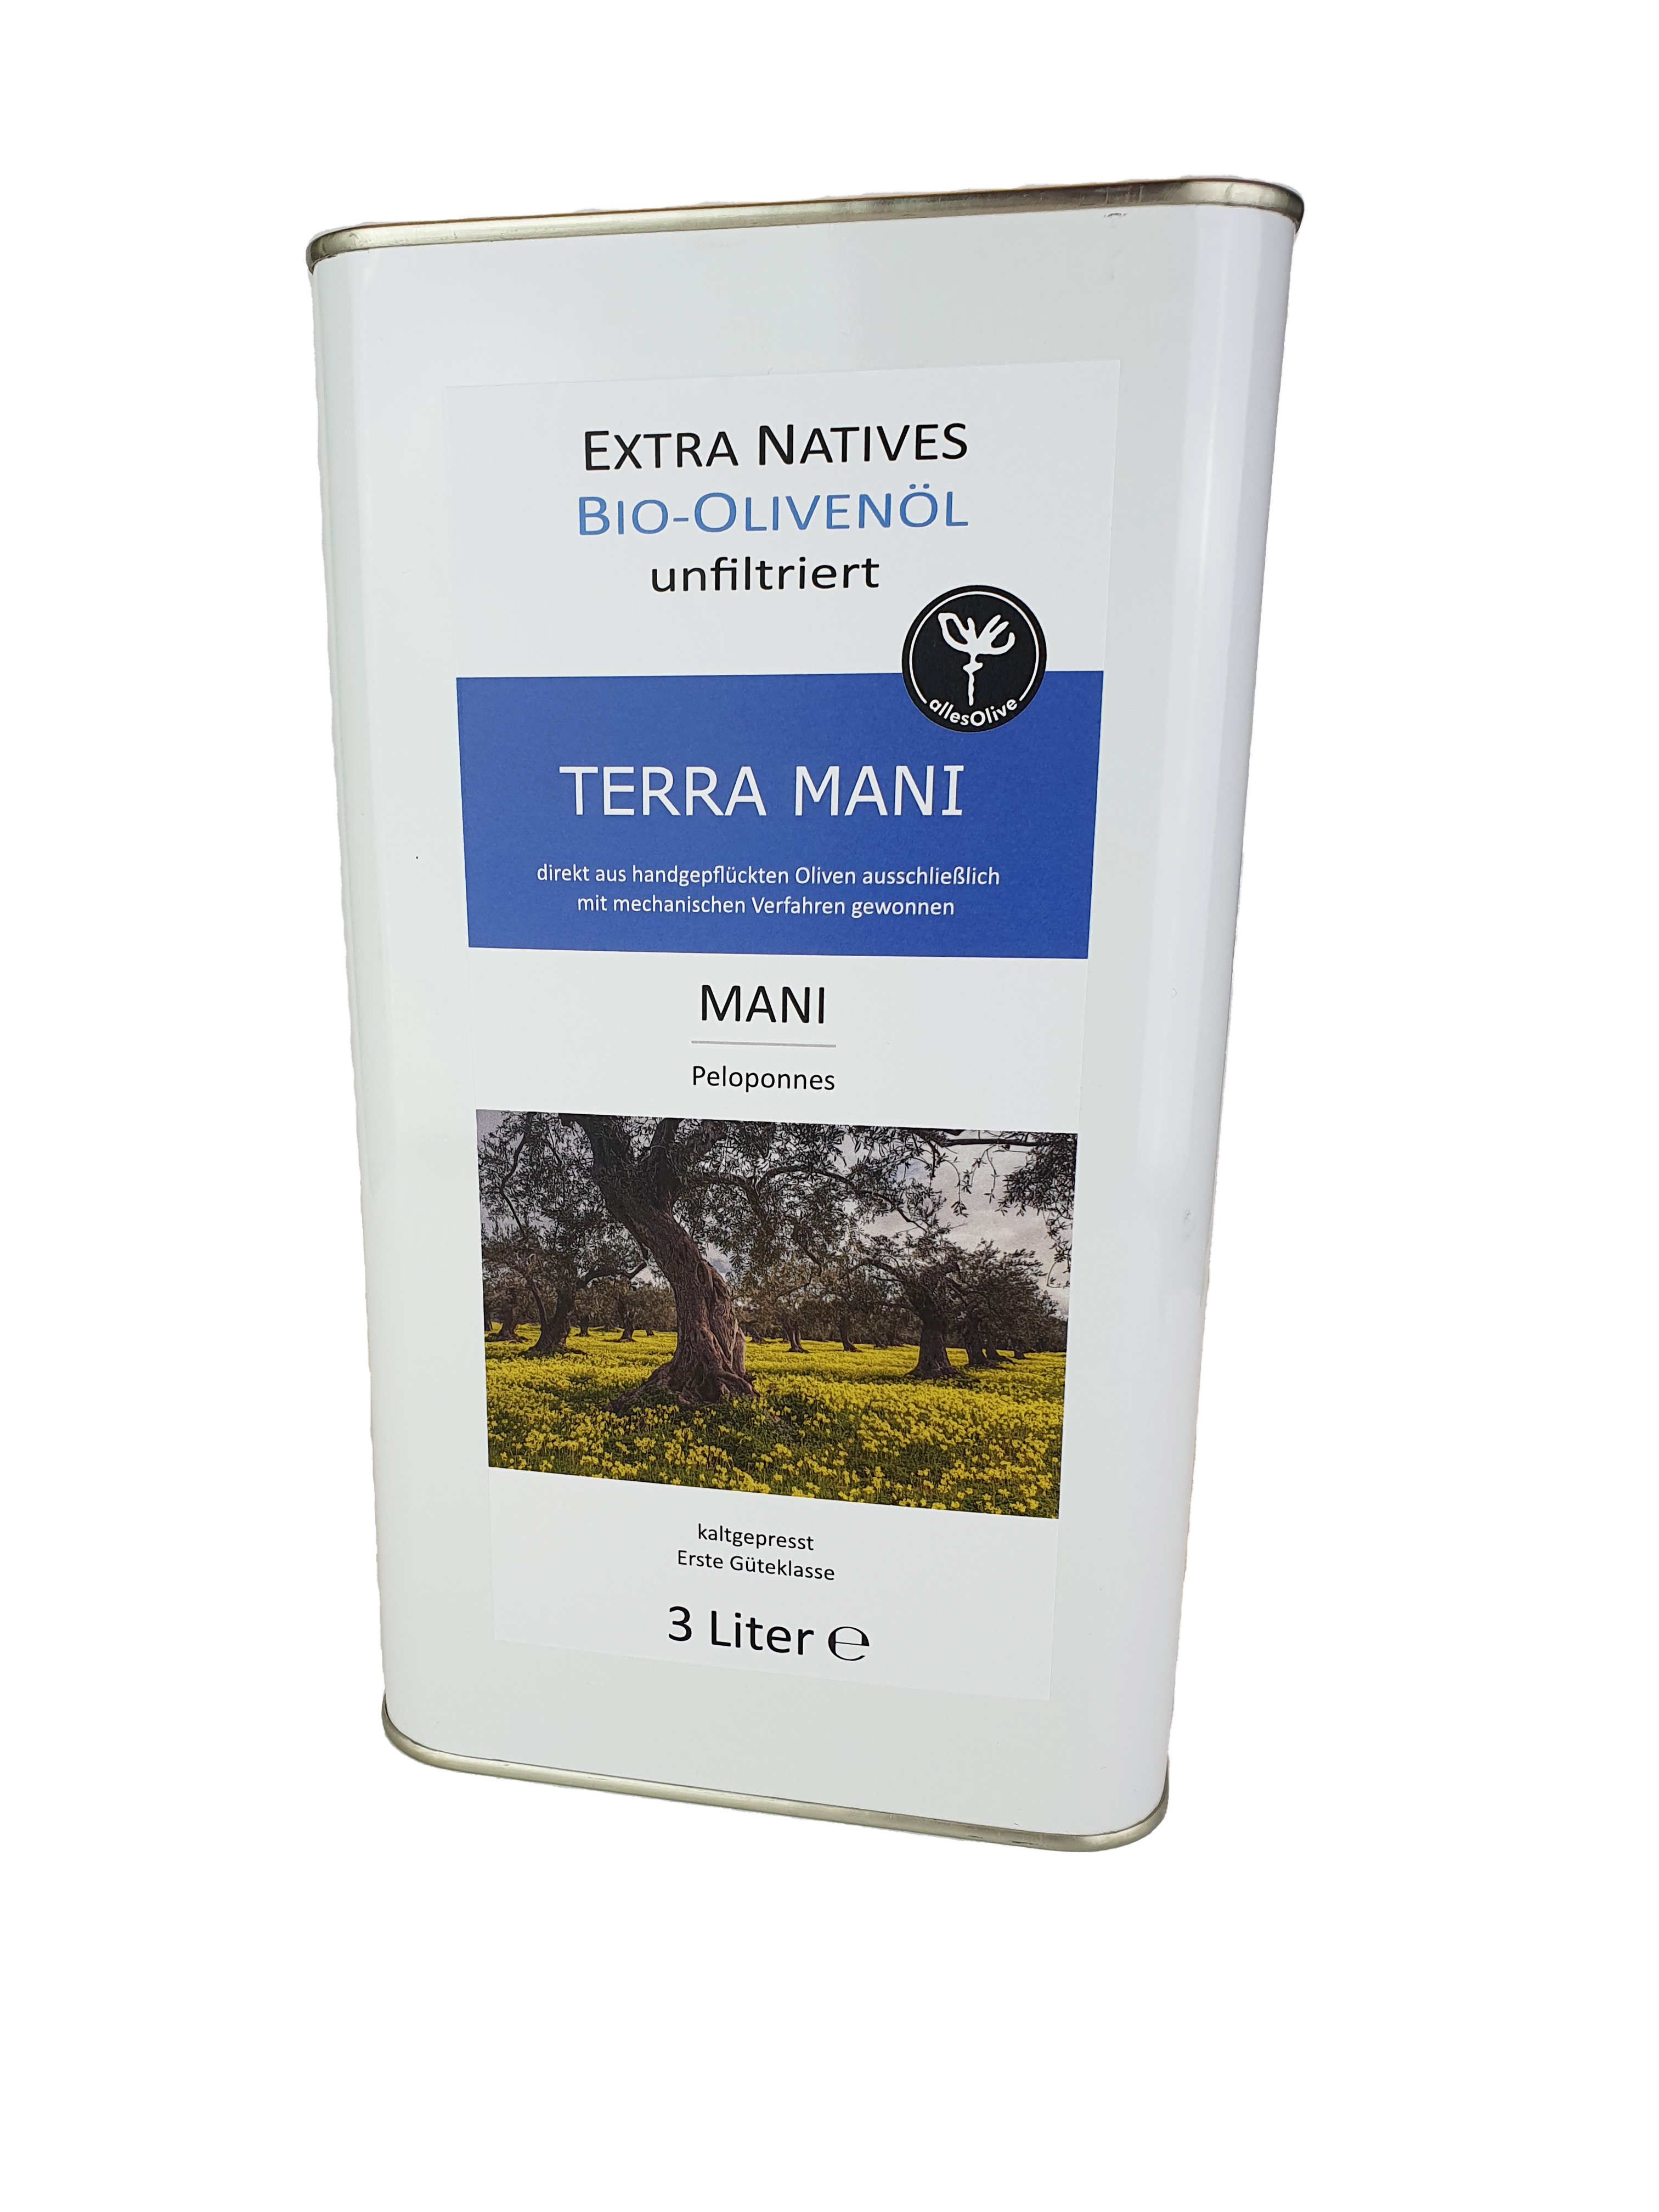 TERRA-MANI Native Organic Extra Virgin Olive Oil, unfiltered, 3L canister.